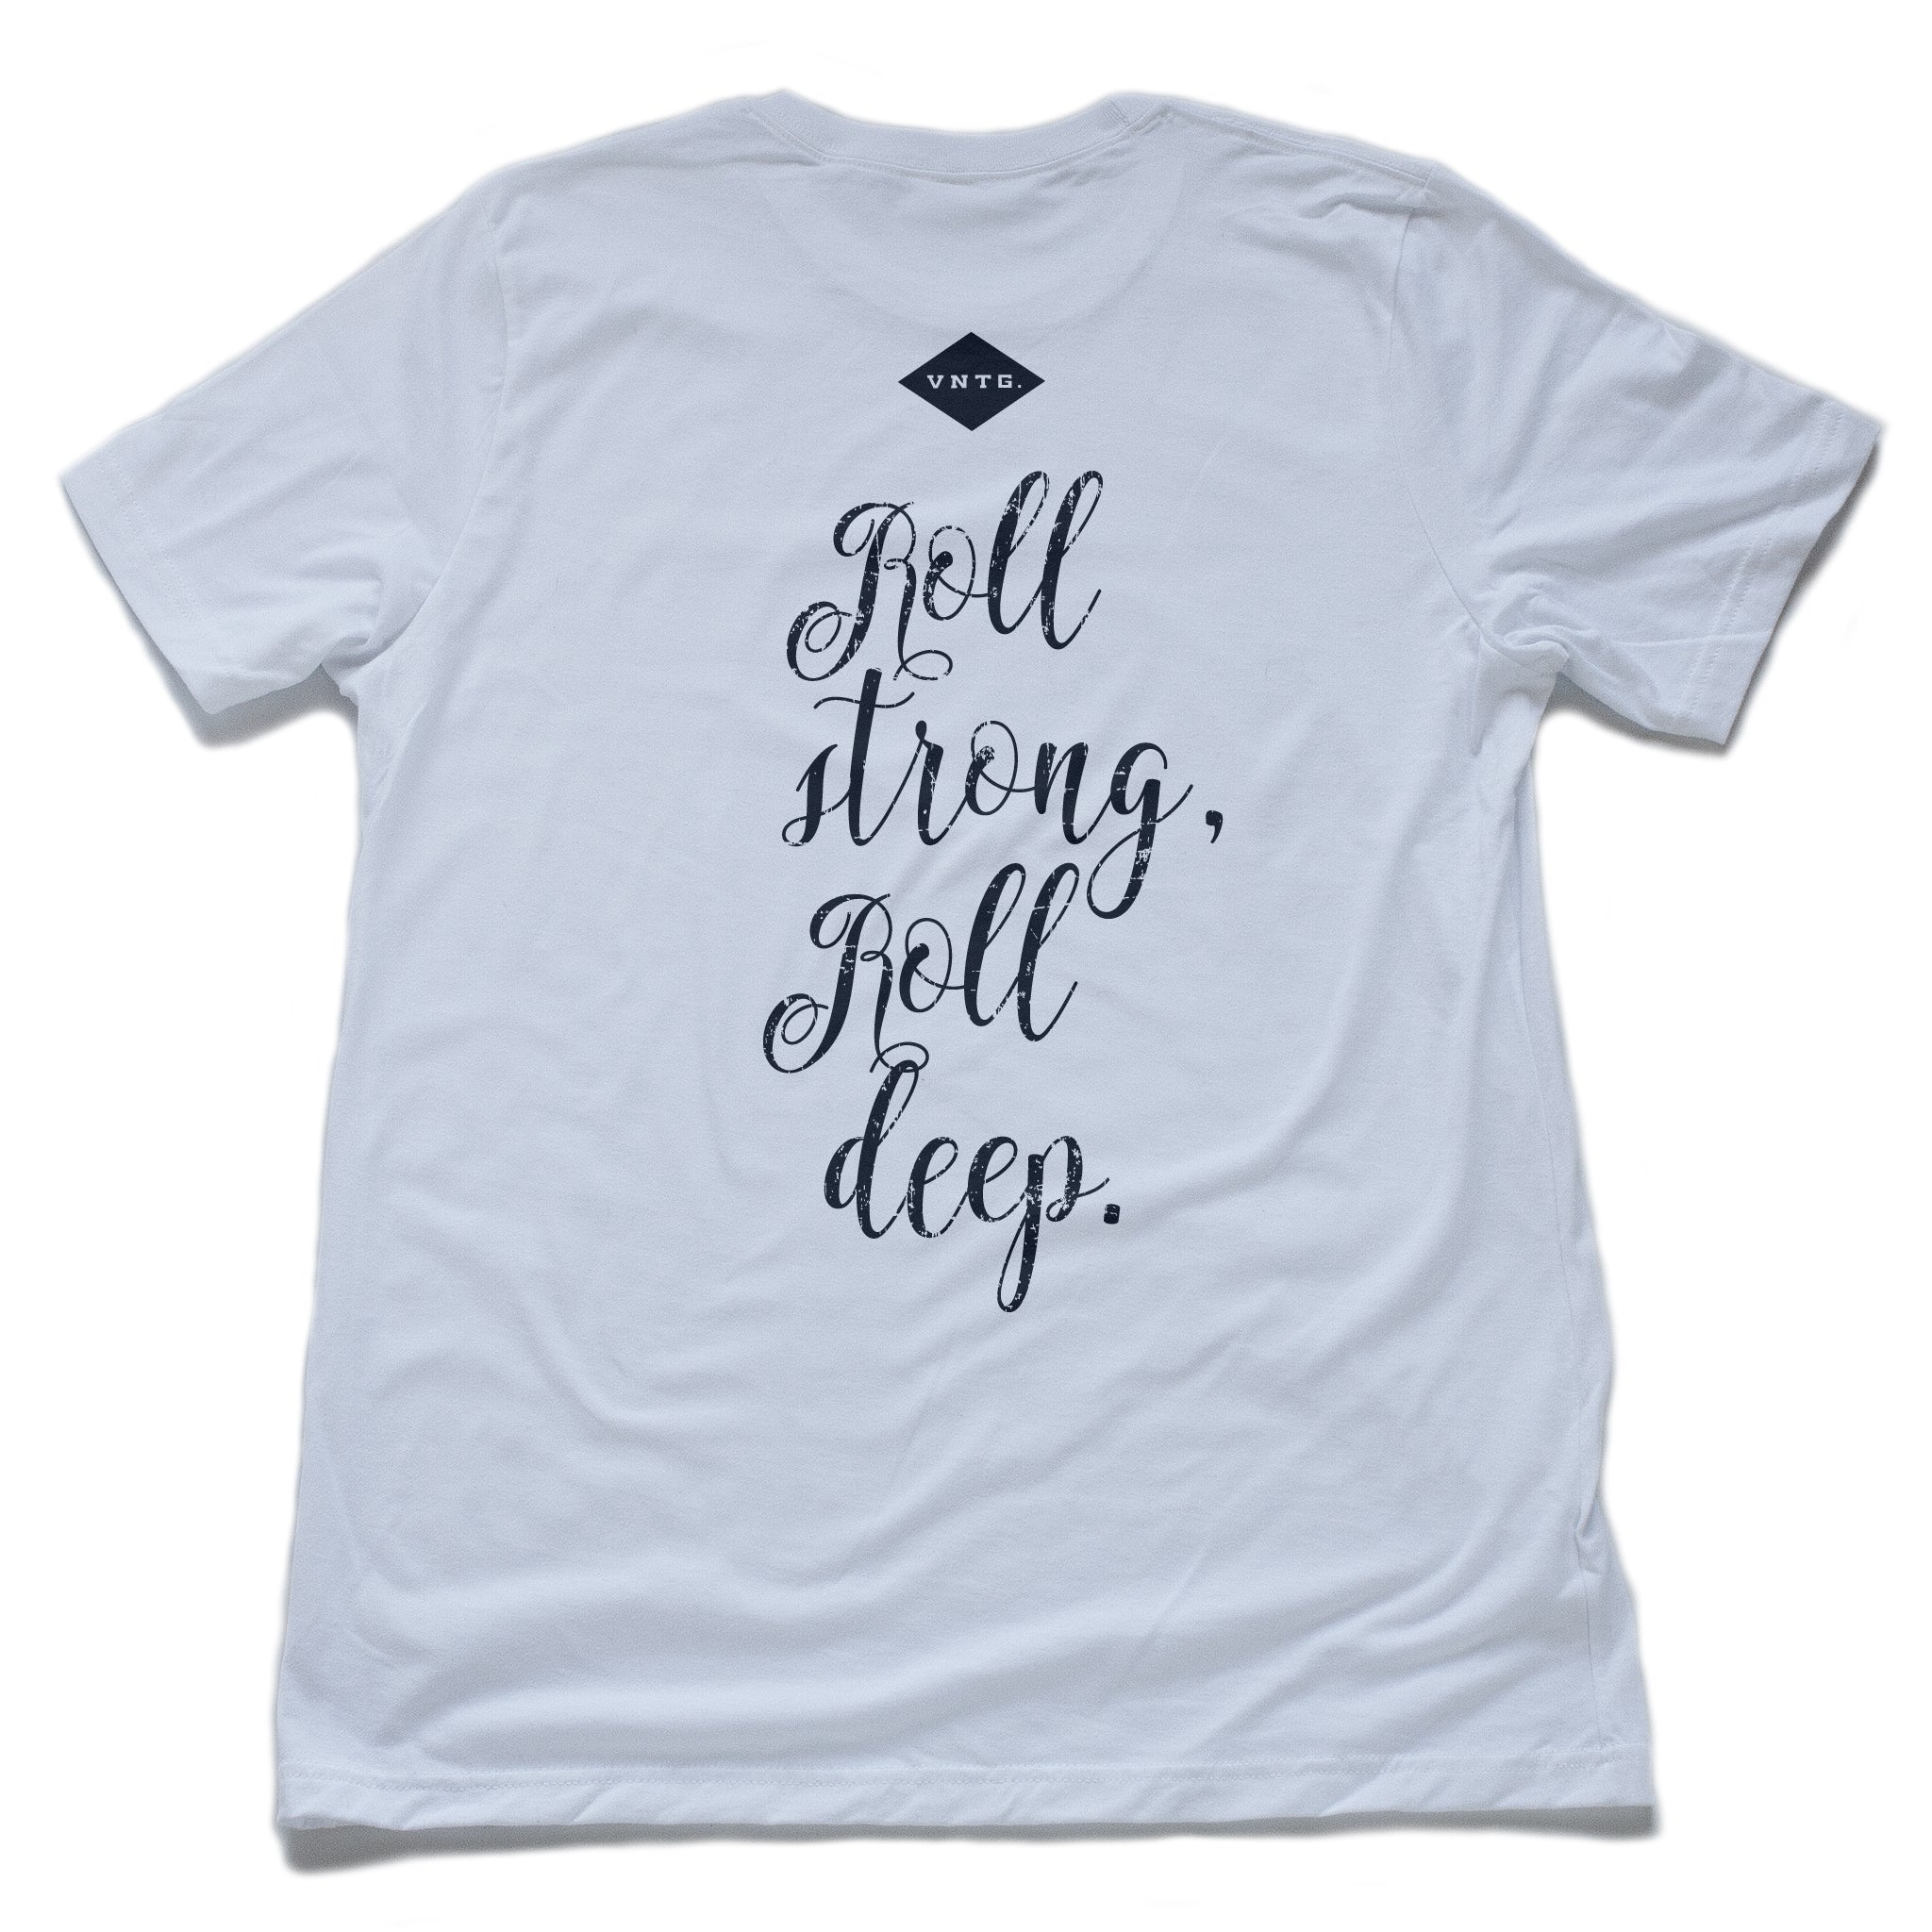 The back of a t-shirt with the text “Roll strong, roll deep.”